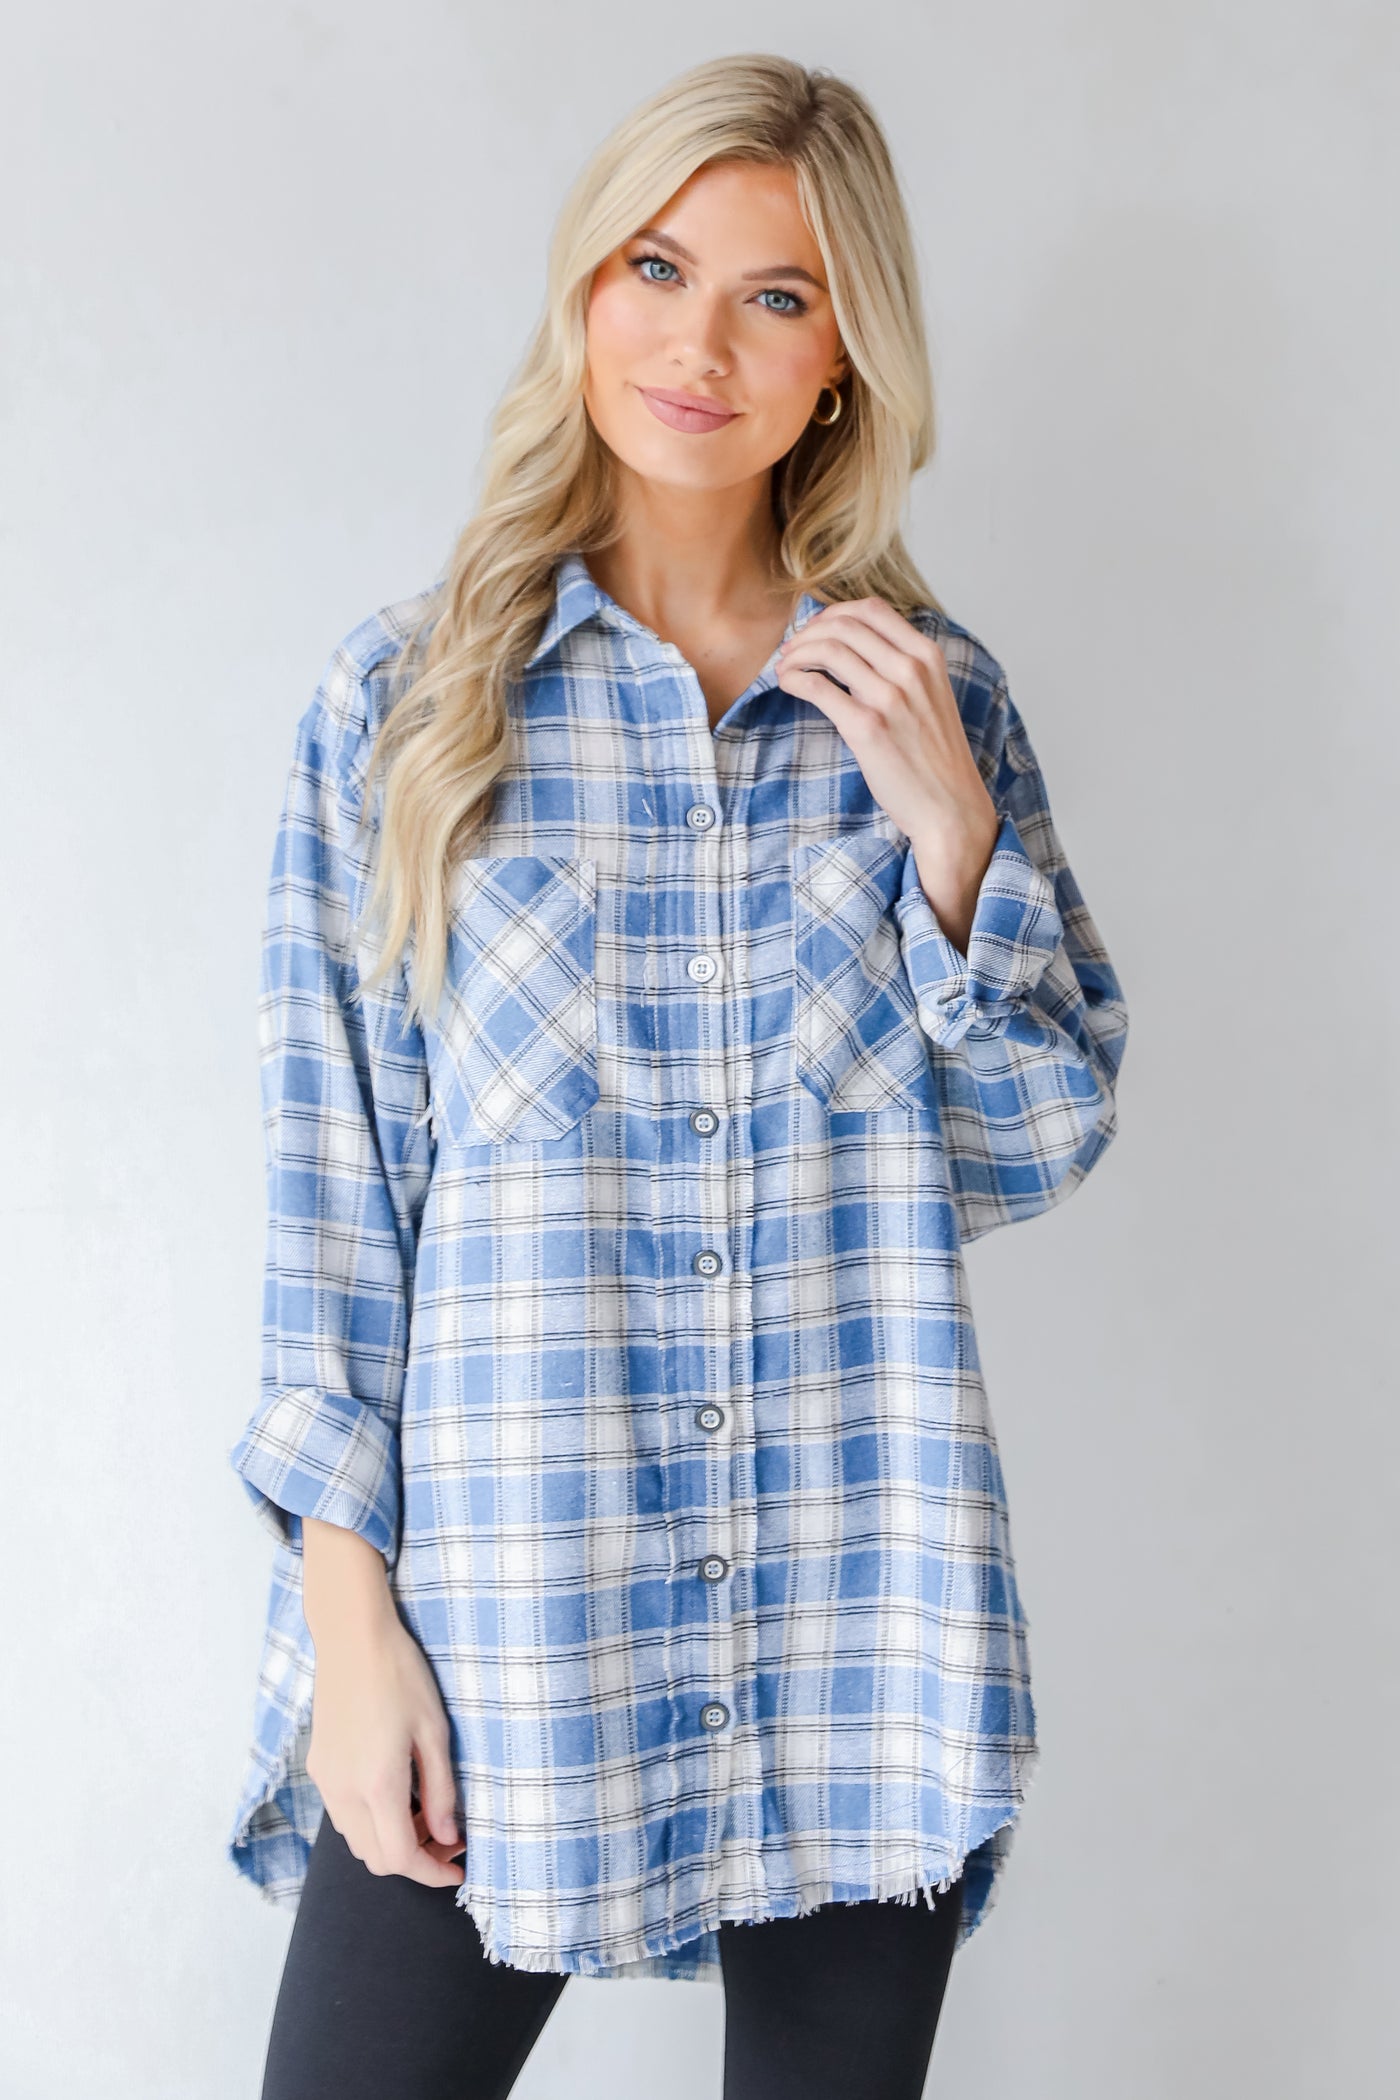 Flannel in blue